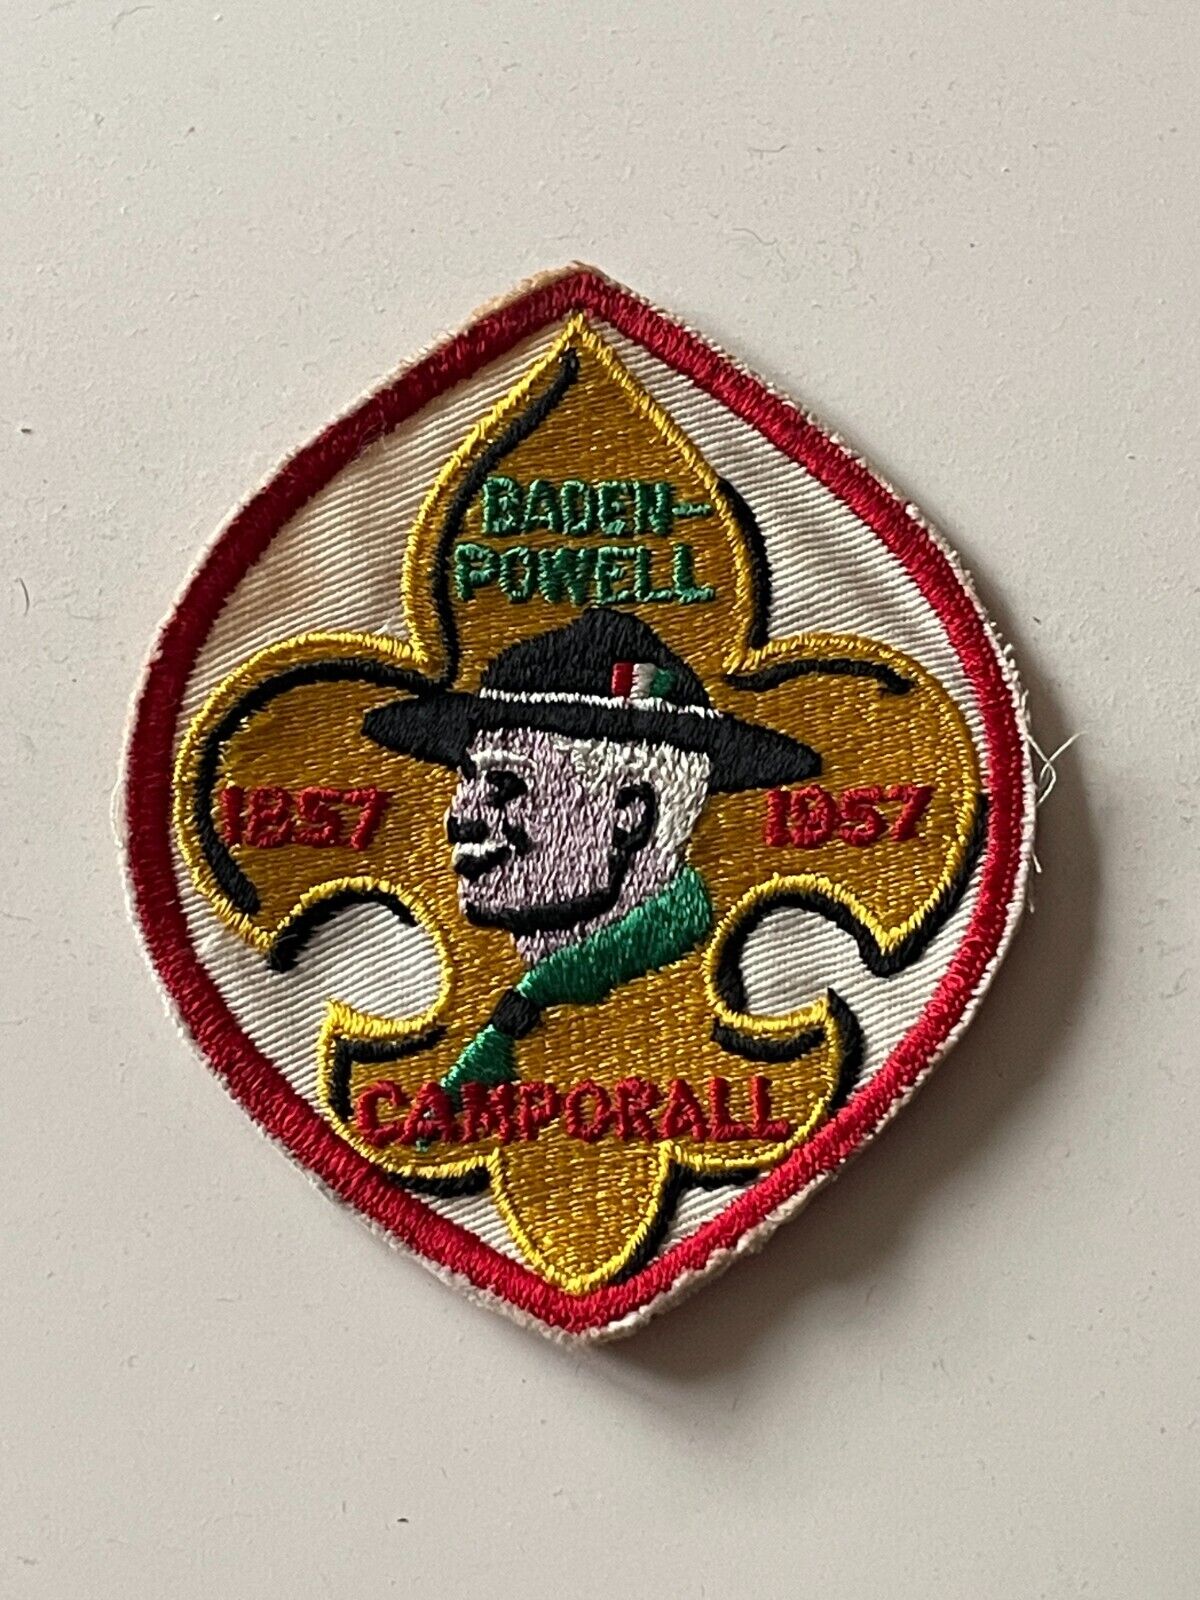 VINTAGE BSA BOY SCOUT BADEN-POWELL 1857-1957 CAMPORALL PATCH